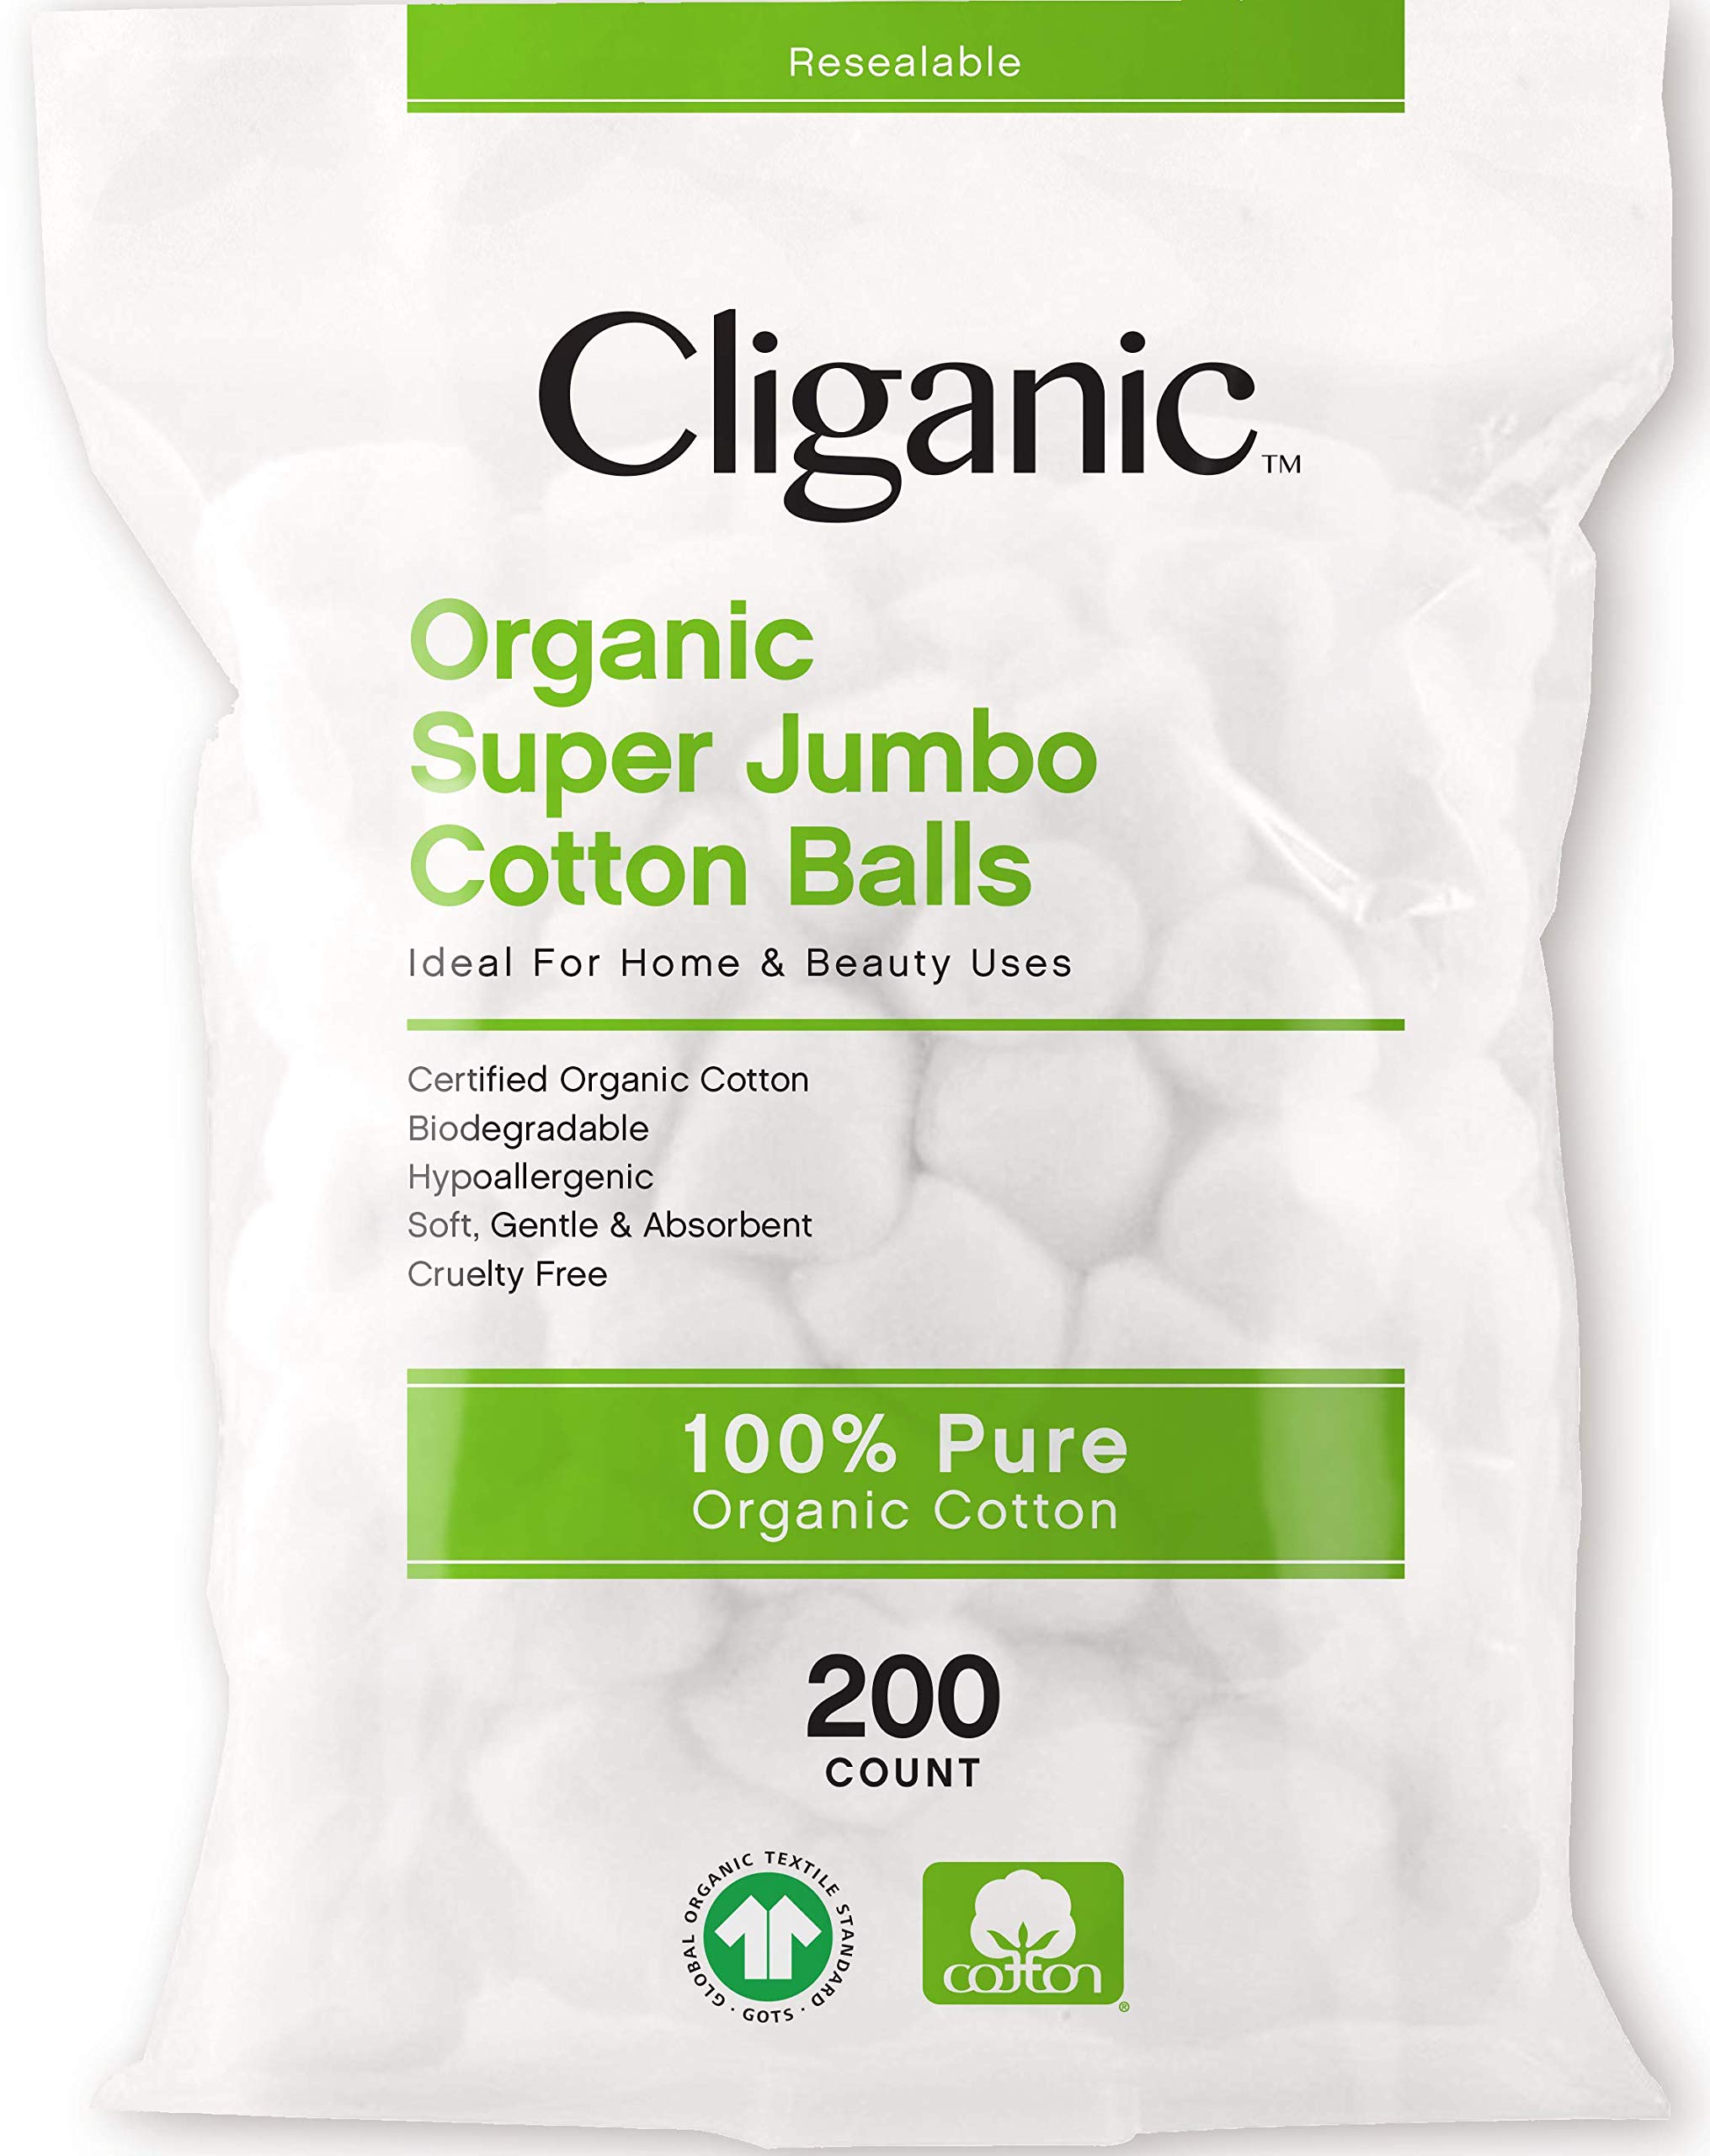 Cliganic Organic Super Jumbo Cotton Balls (200 Count) - Hypoallergenic, Absorbent, Large Size, 100% Pure